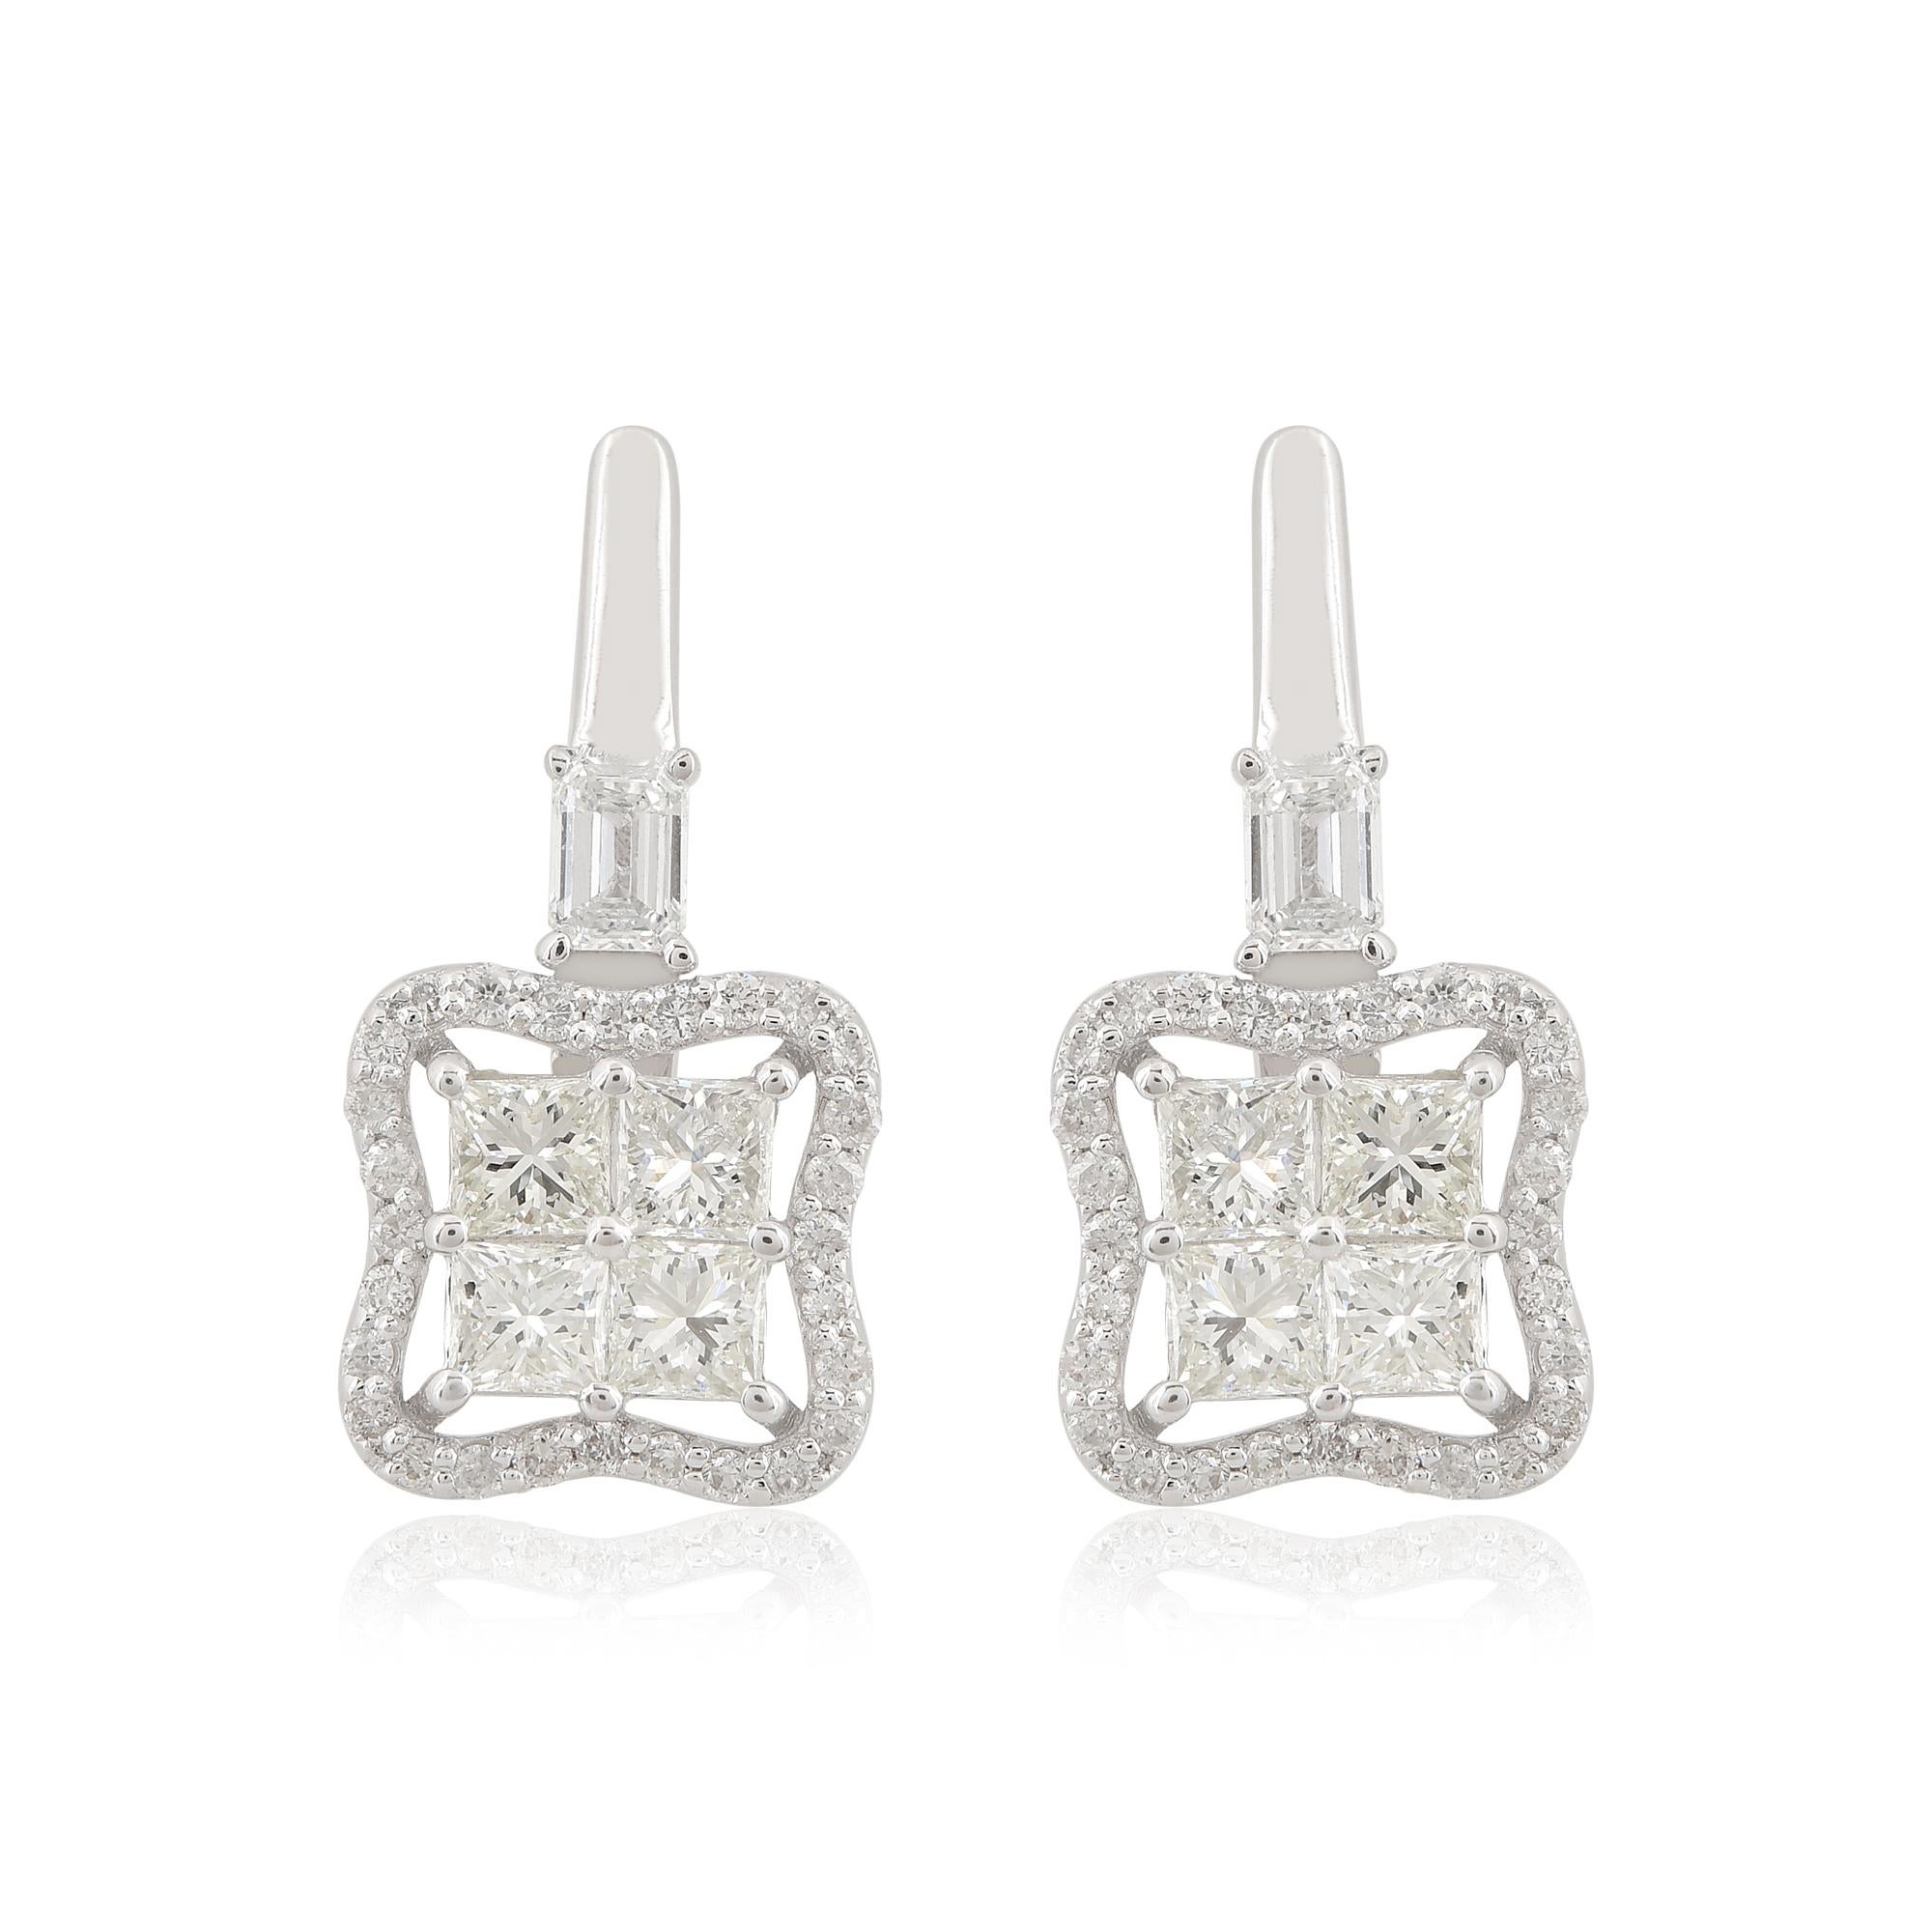 Item Code :- SEE-11811B
Gross Weight :- 4.28 gm
18k Solid White Gold Weight :- 4.02 gm
Natural Diamond Weight :- 1.32 carat  ( AVERAGE DIAMOND CLARITY SI1-SI2 & COLOR H-I )
Earrings Size :- 10 x 19 mm approx.

✦ Sizing
.....................
We can